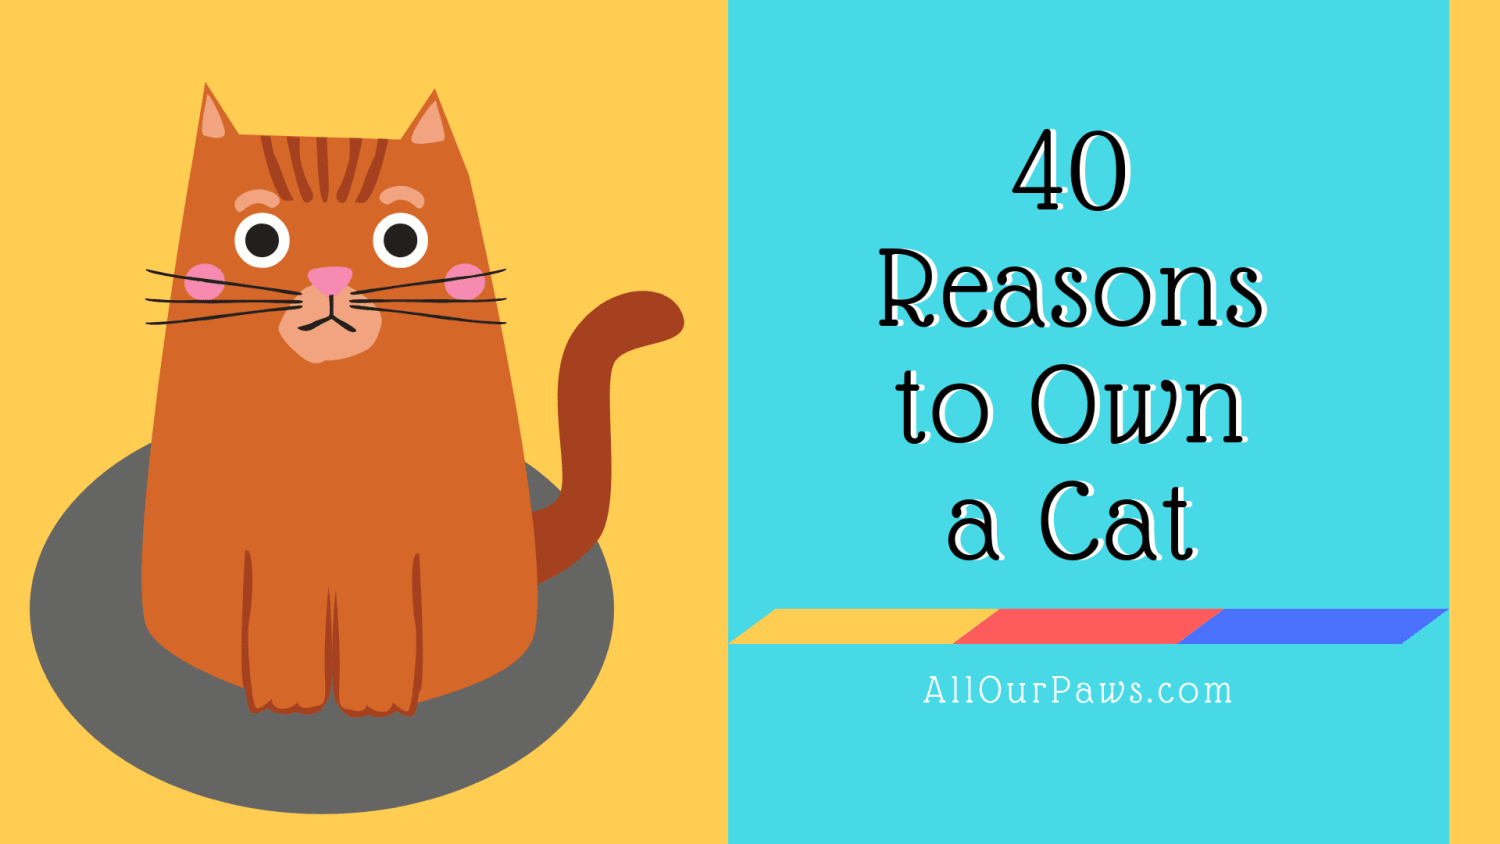 40 Reasons to Own a Cat